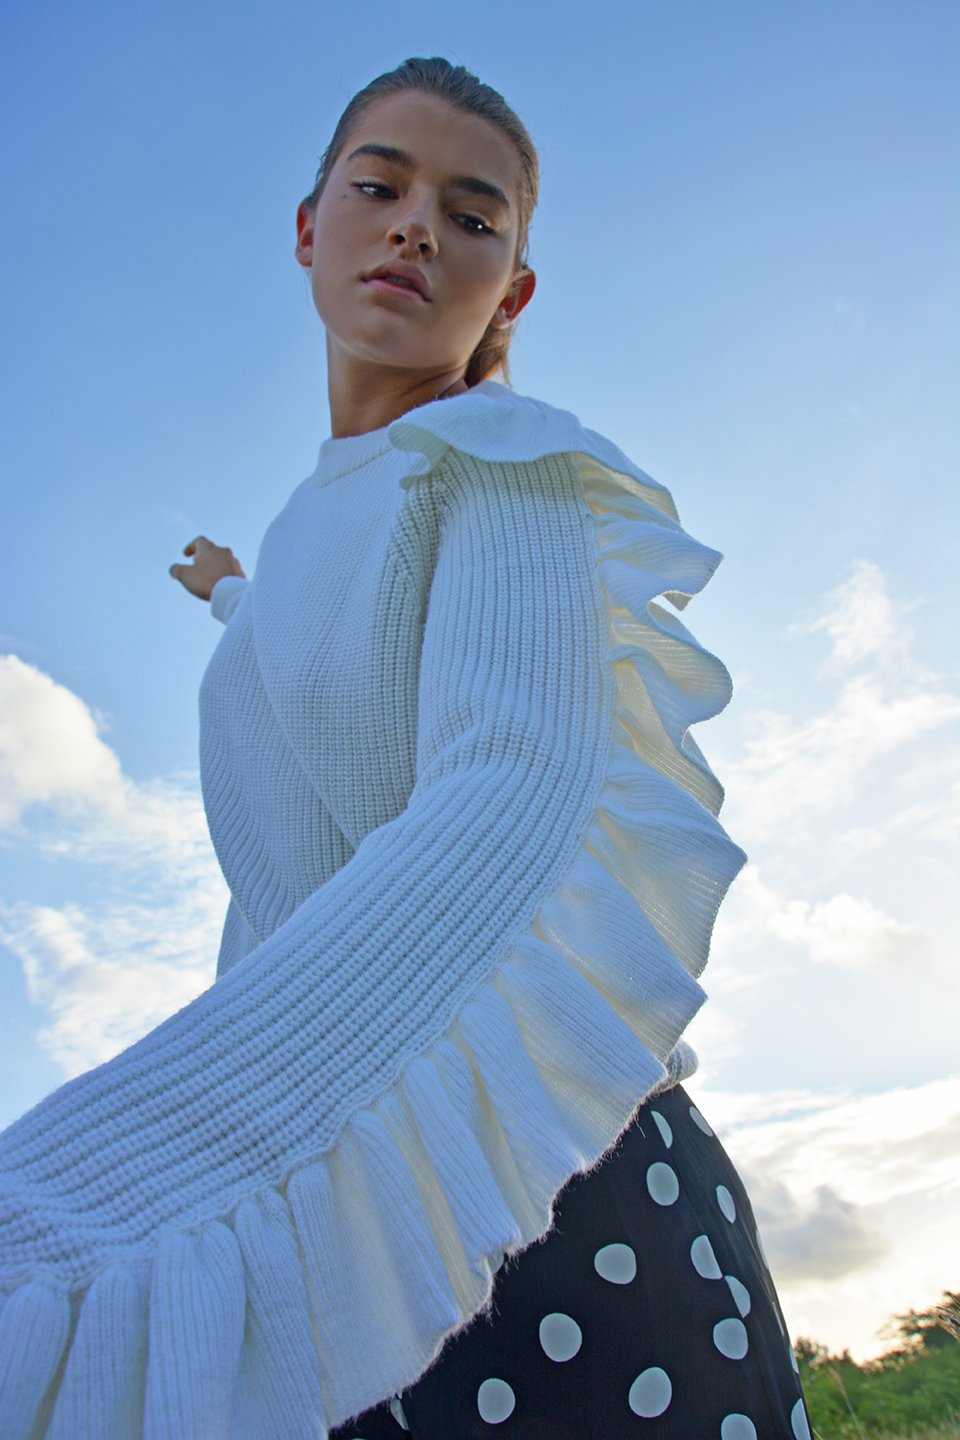 PAPER London—high quality, sustainable fashion that's chic, fun, and ...